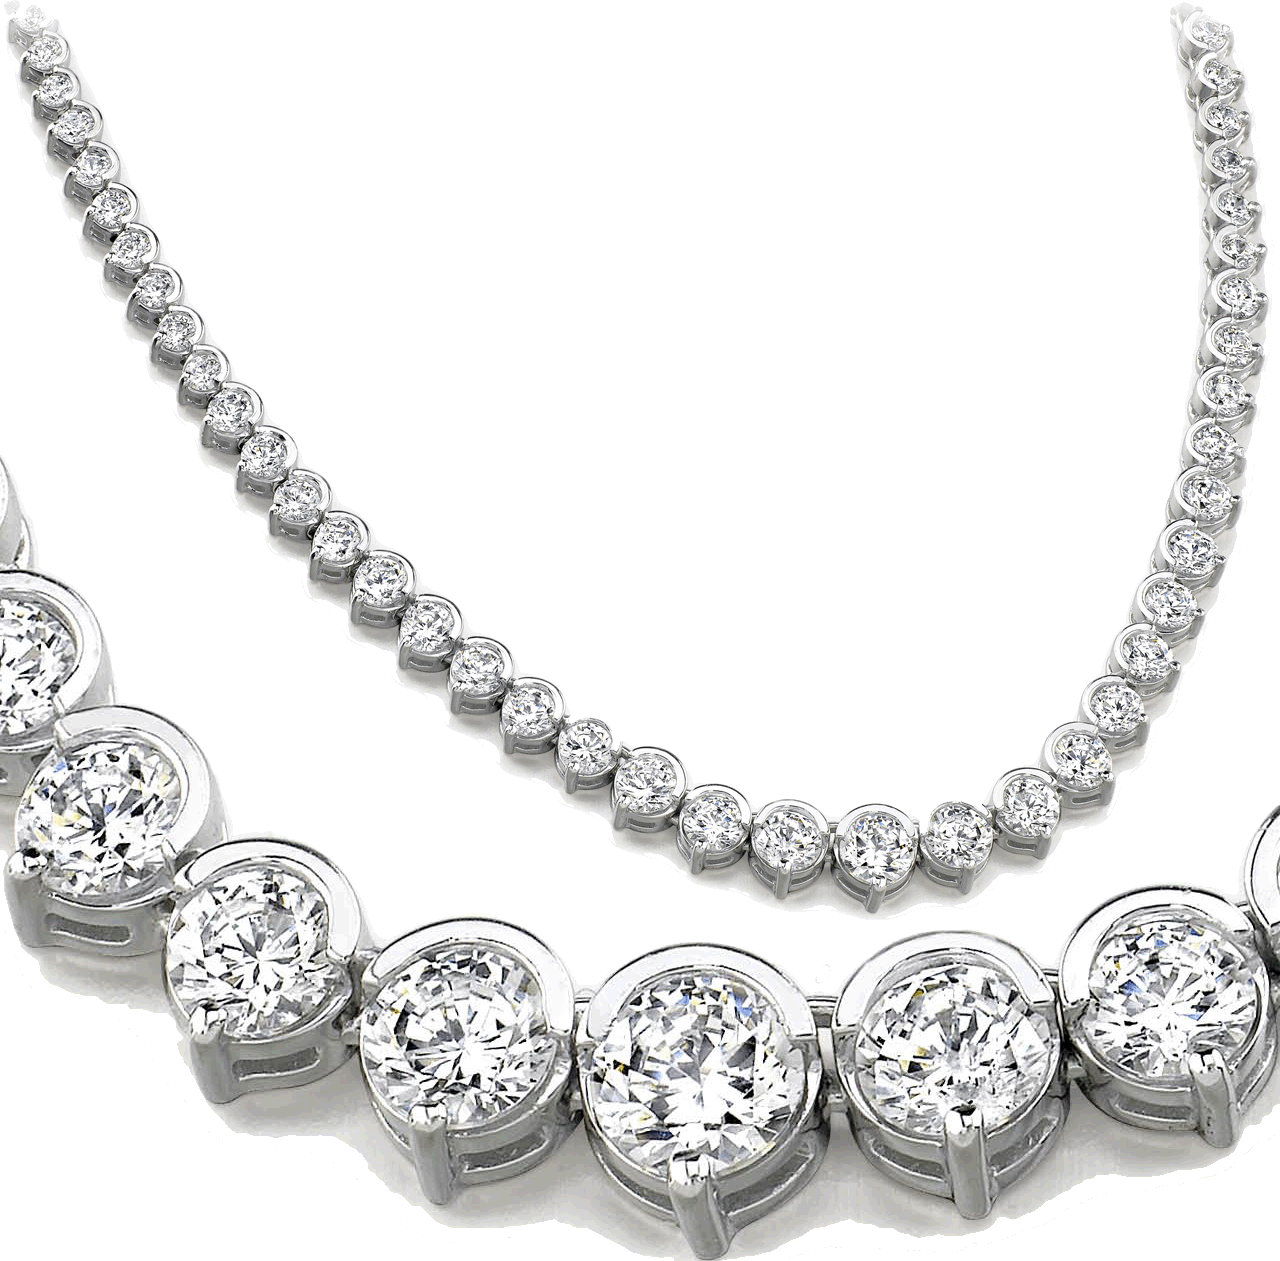 Image for the collection Diamond Necklaces